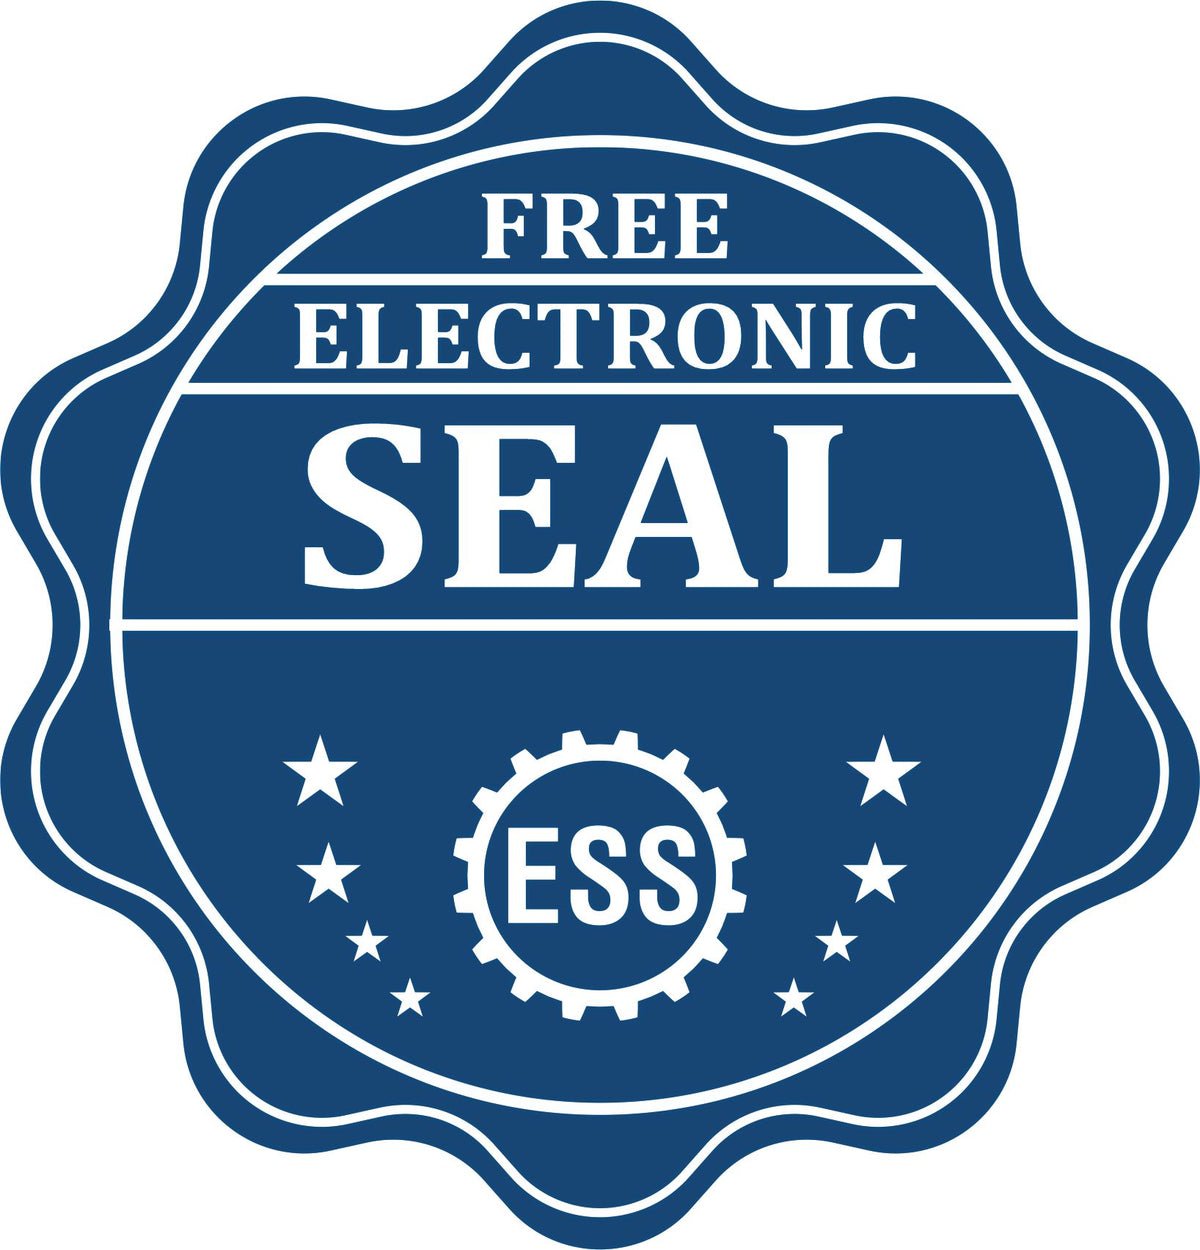 A badge showing a free electronic seal for the PSI Massachusetts Notary Stamp with stars and the ESS gear on the emblem.